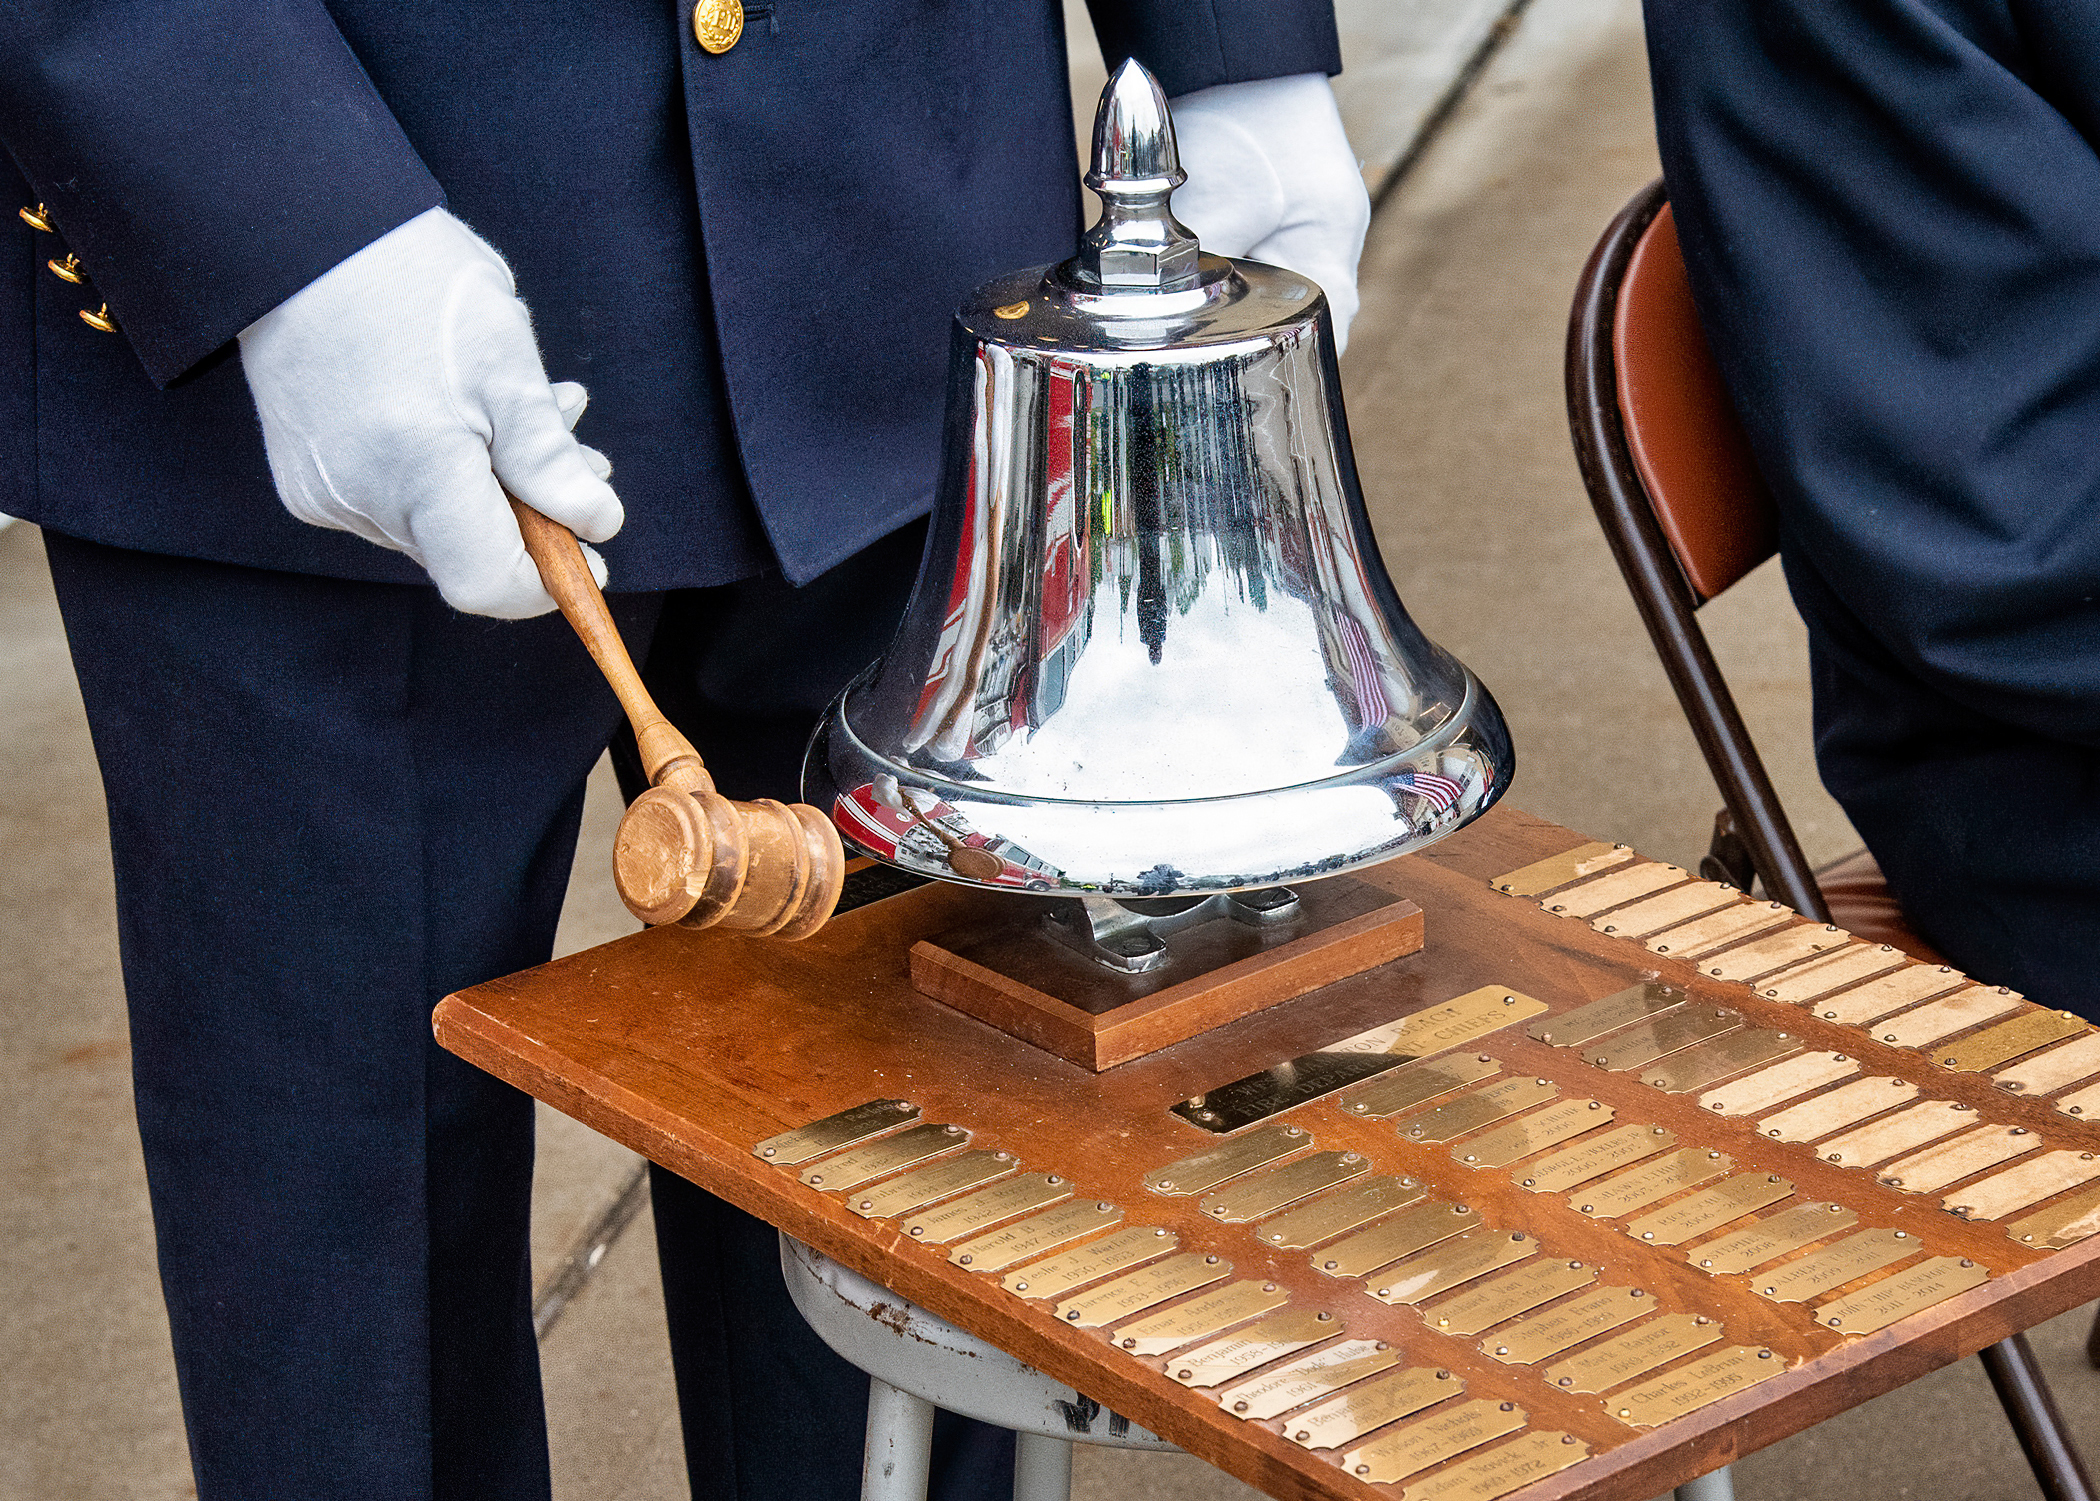 The Westhampton Beach Fire Department’s bell is rung once for each deceased member.  COURTESY WESTHAMPTON BEACH FIRE DEPARTMENT